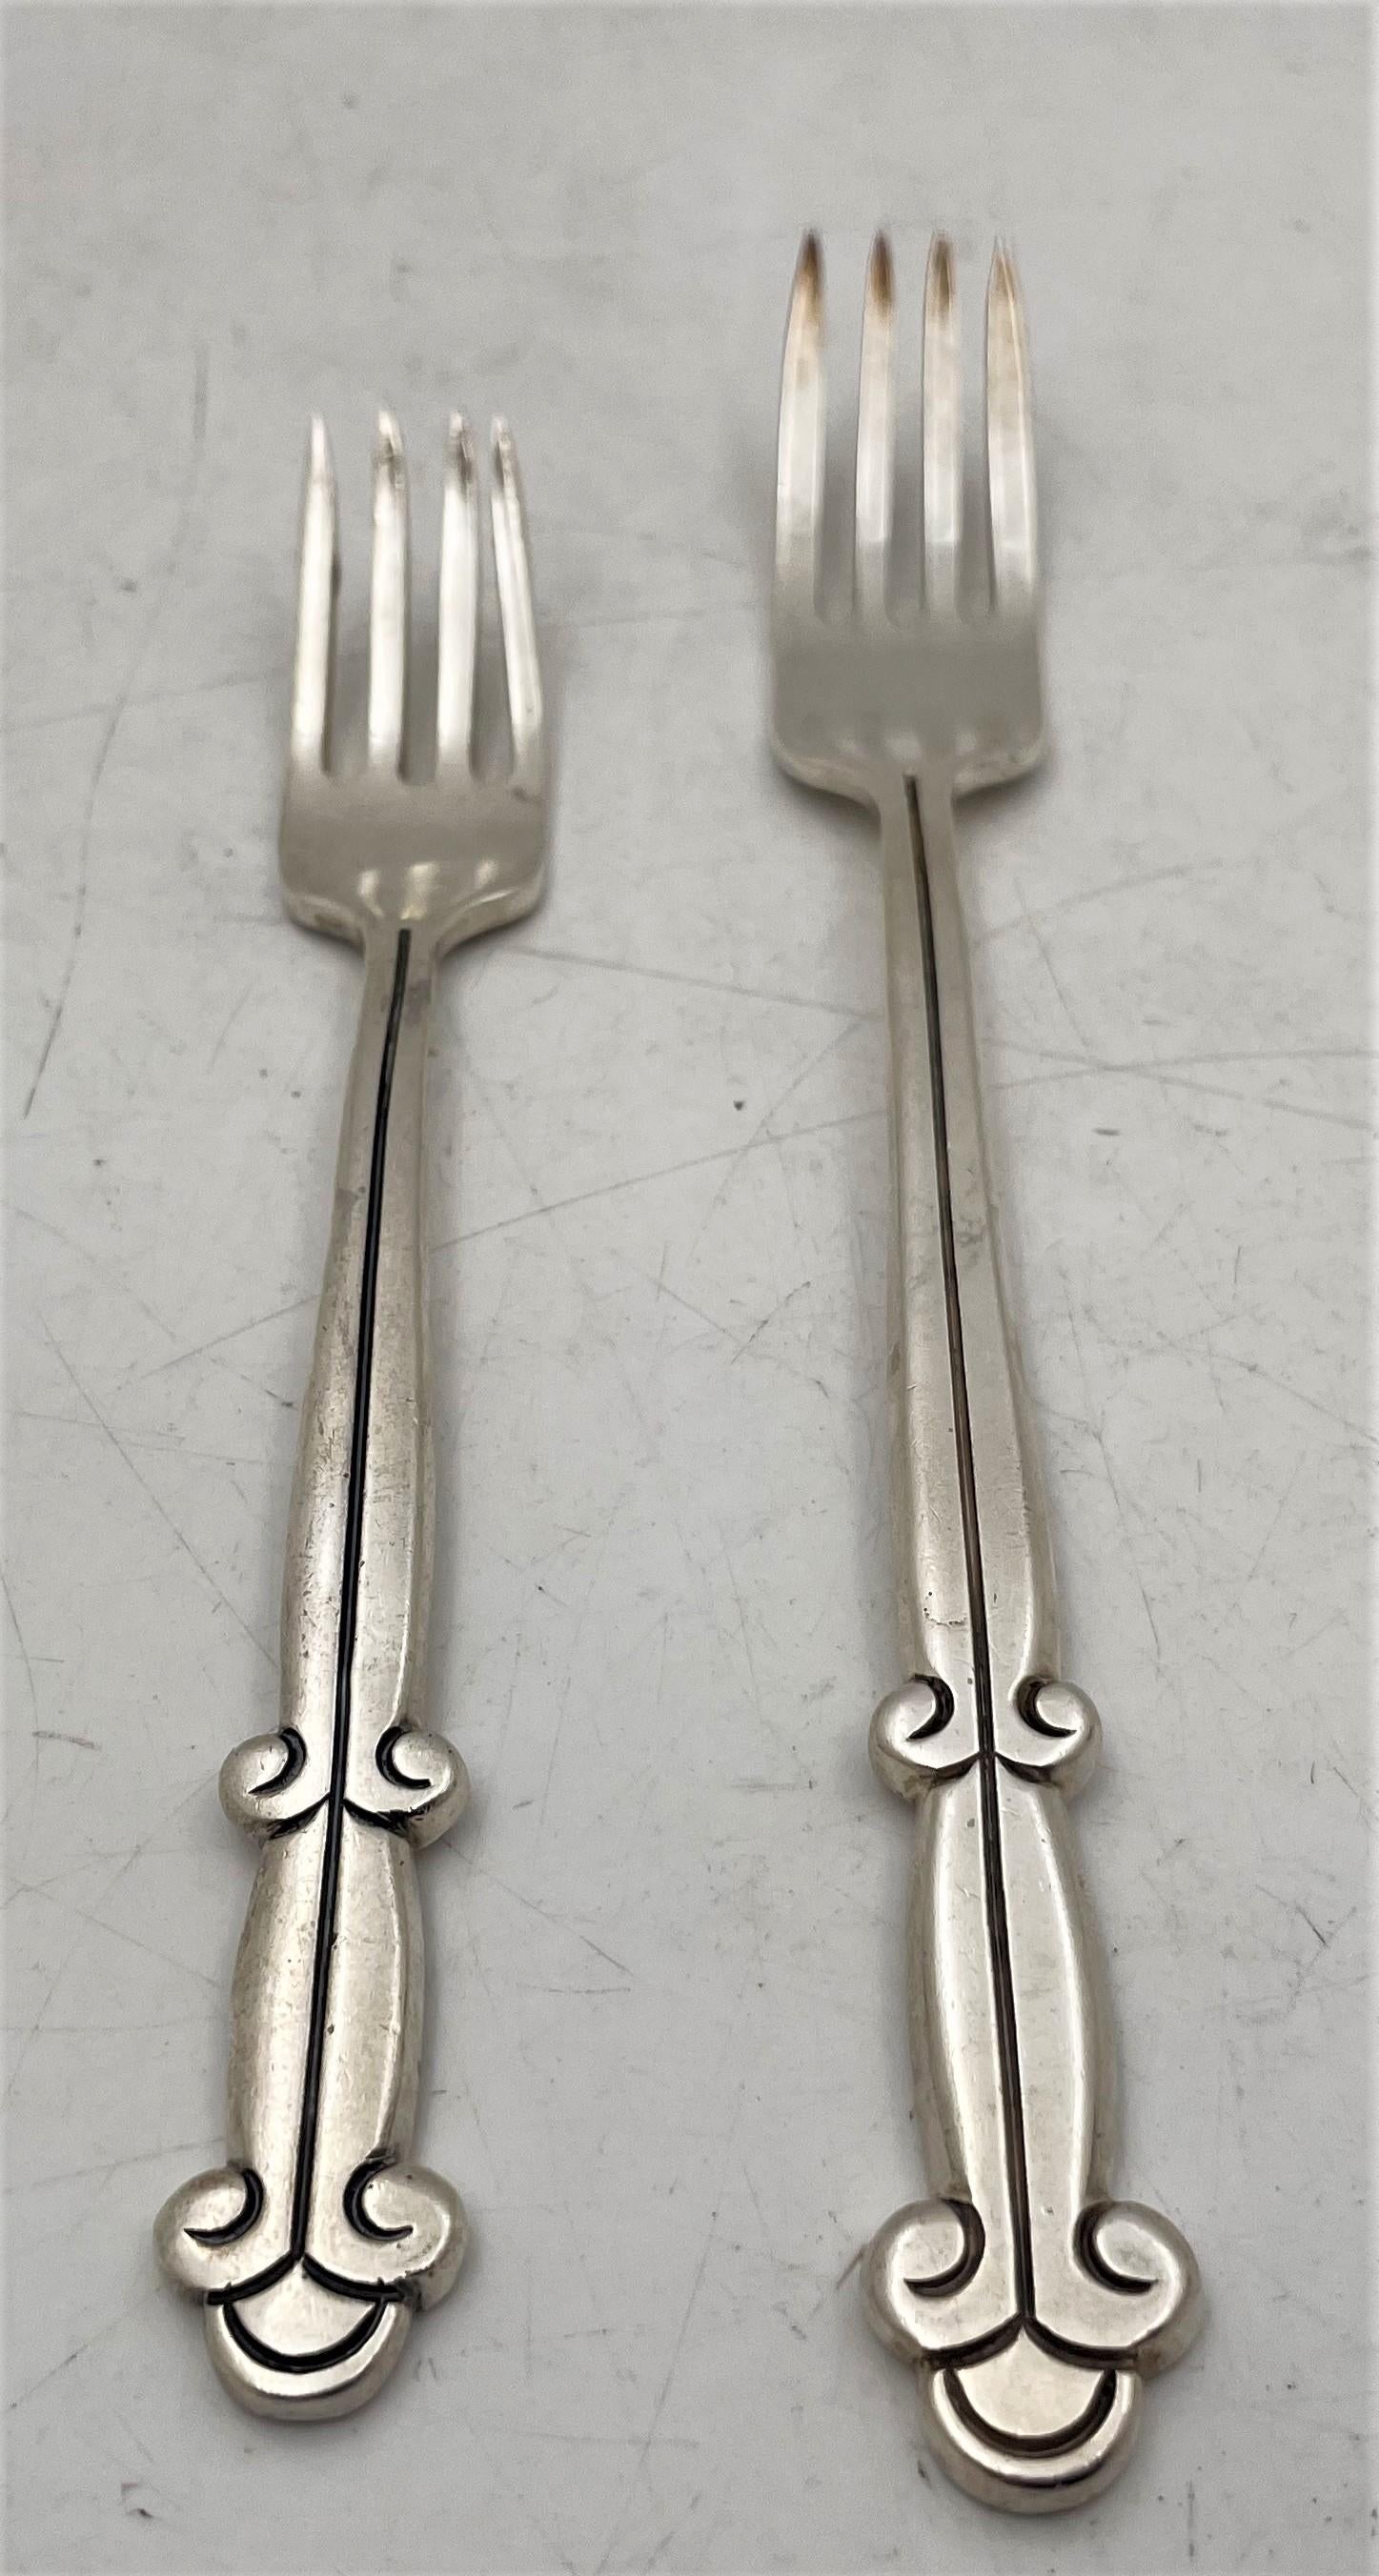 Mexican, sterling silver flatware set, similar to Los Castillo or William Spratling in design and in quality, consisting of:

- 6 dinner knives, measuring 9 1/4'' in length 
- 6 dinner forks, measuring 7 1/4'' in length
- 6 salad forks, measuring 6